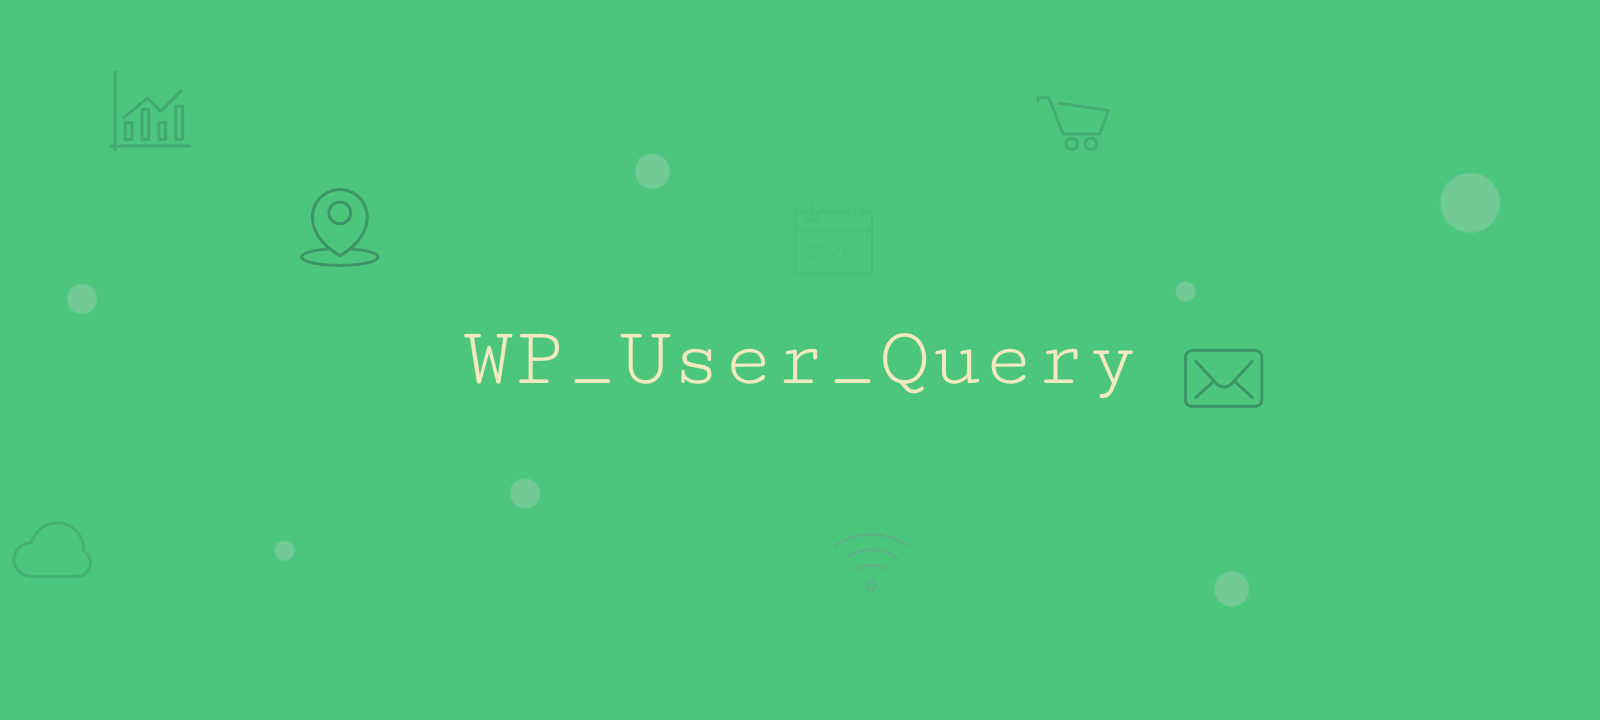 wp user query